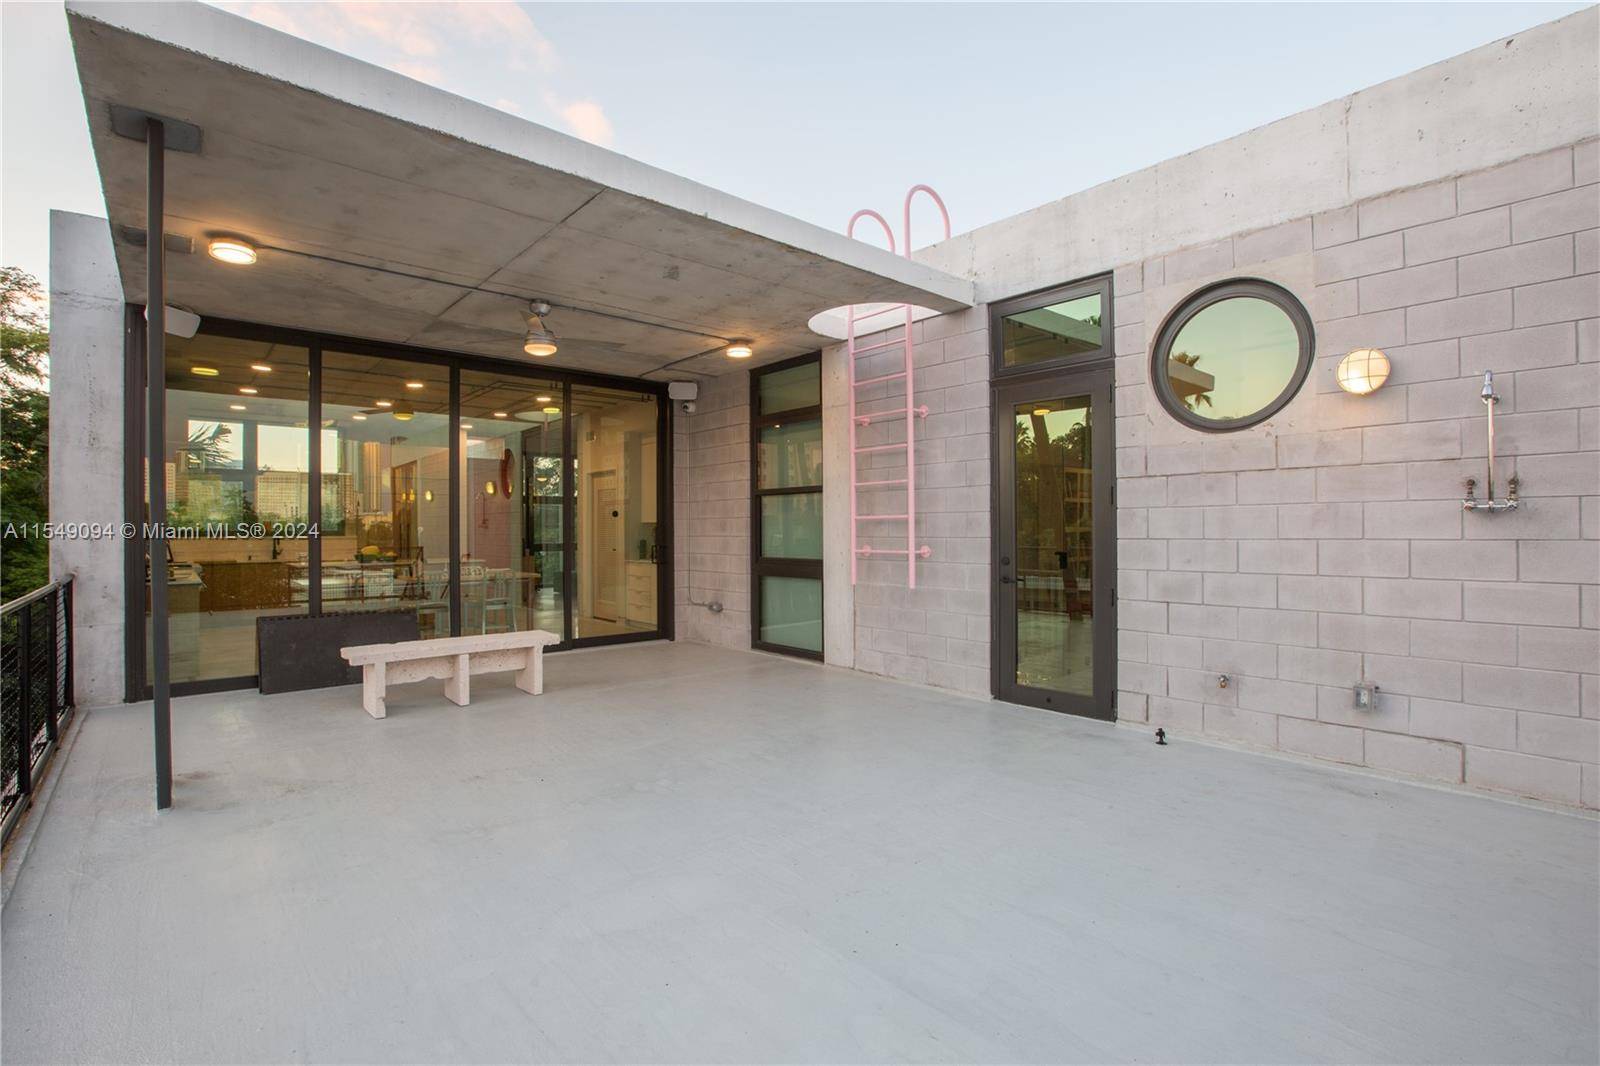 Enjoy contemporary art and architecture in this one of a kind contemporary home in historic Spring Garden, nestled along the river's north bank, and centrally located within minutes from Miami ...